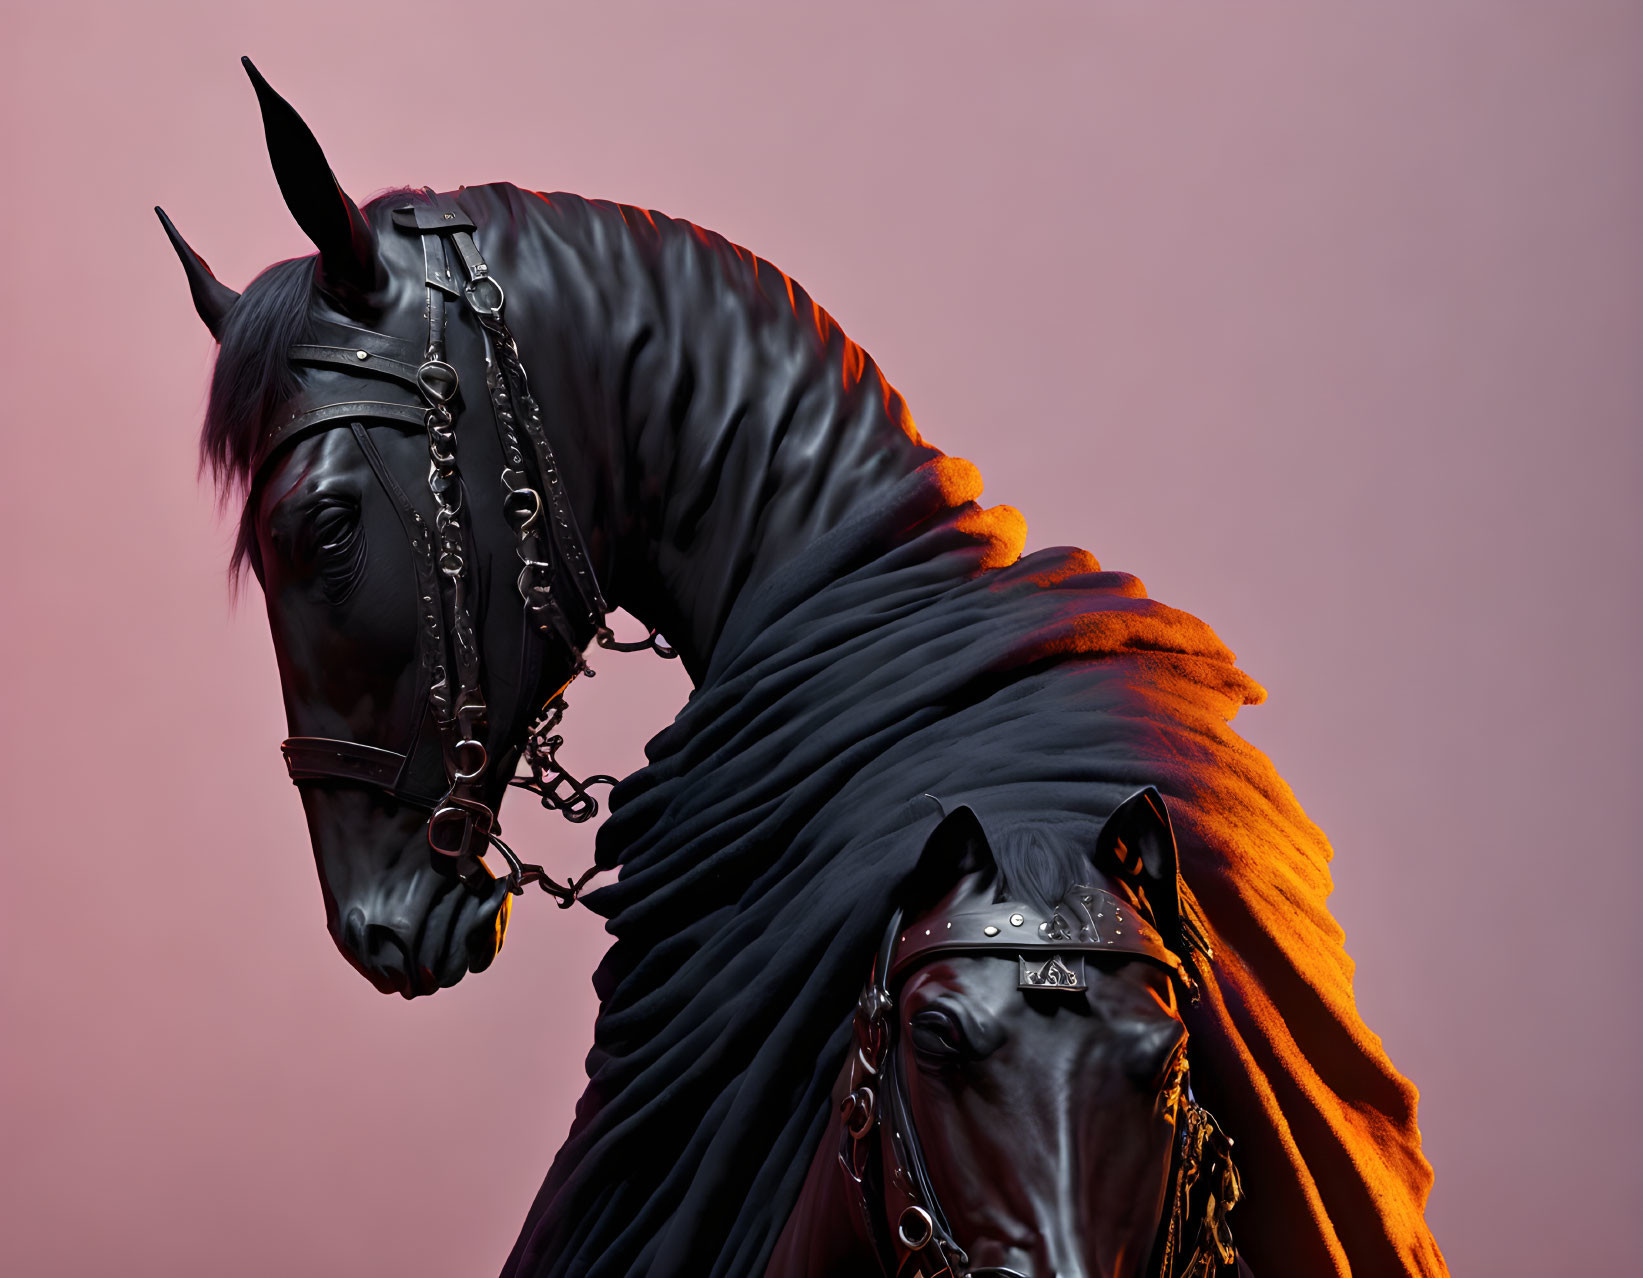 Majestic black horse with leather harness in vibrant orange cloth